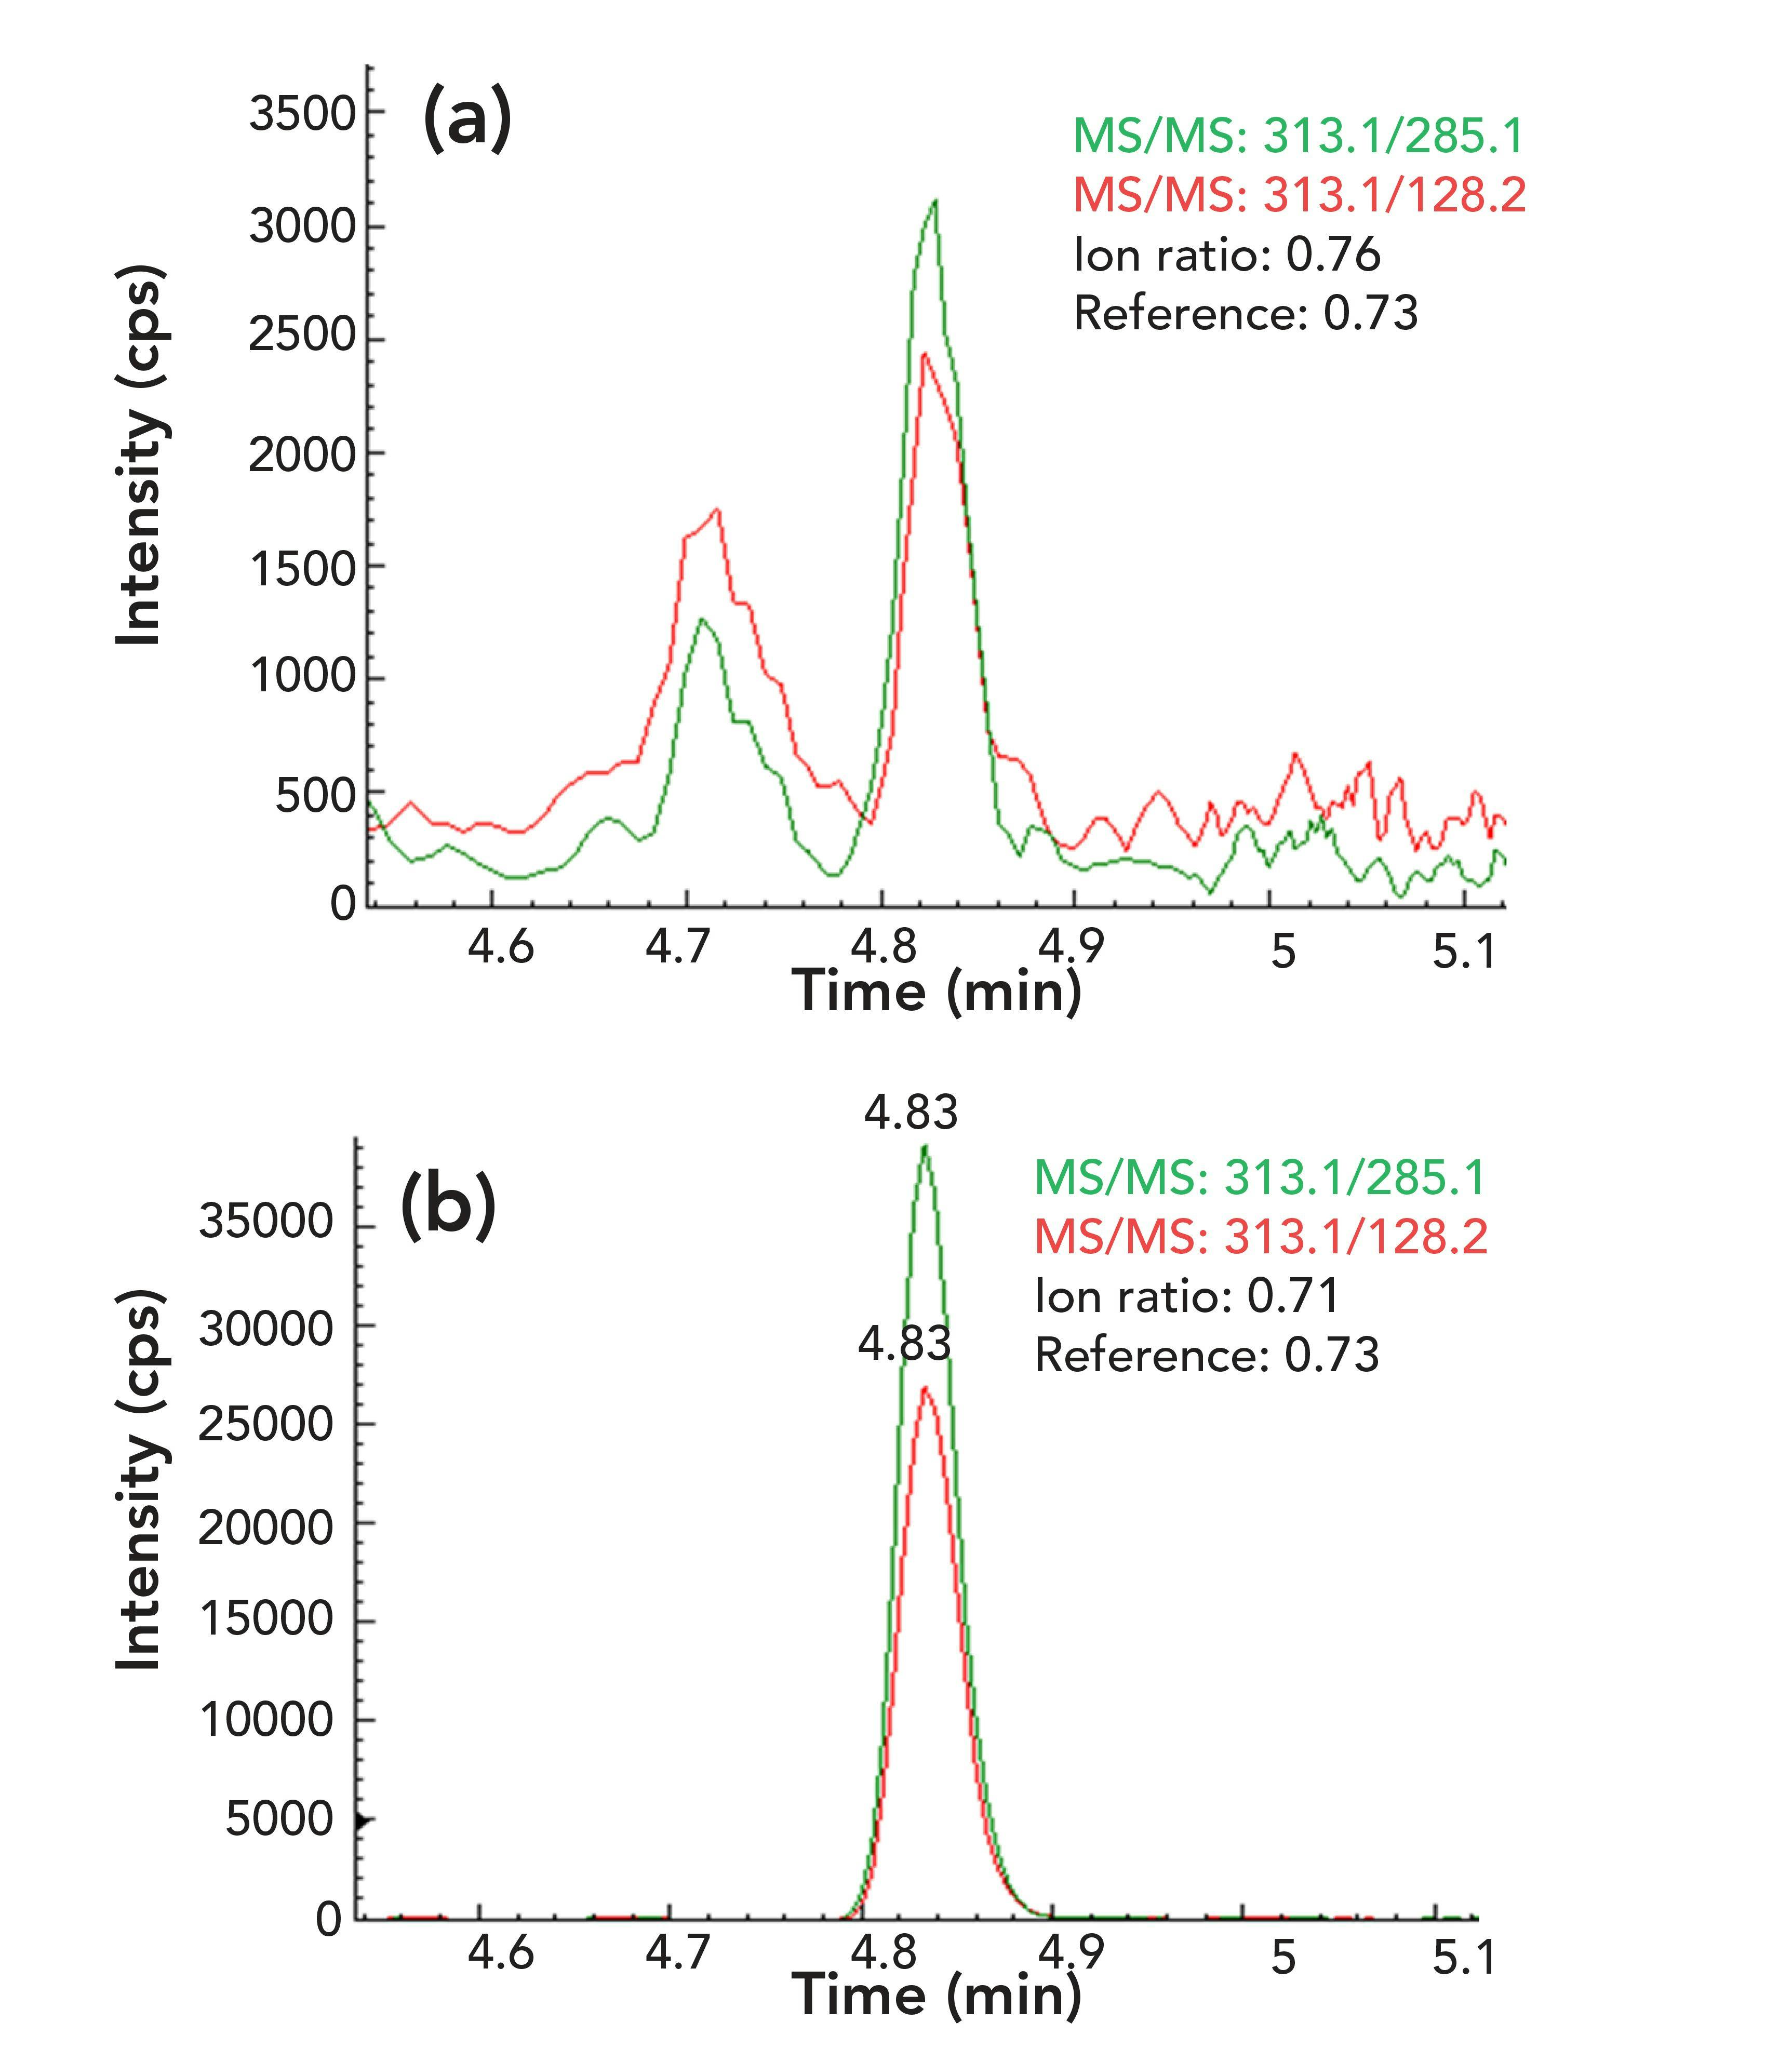 FIGURE 1: Two overlapped MRM chromatograms of AFB1 in a peanut butter sample: (a) sample prepared by reference method (18) without IAC clean-up; (b) sample prepared by IAC clean-up.